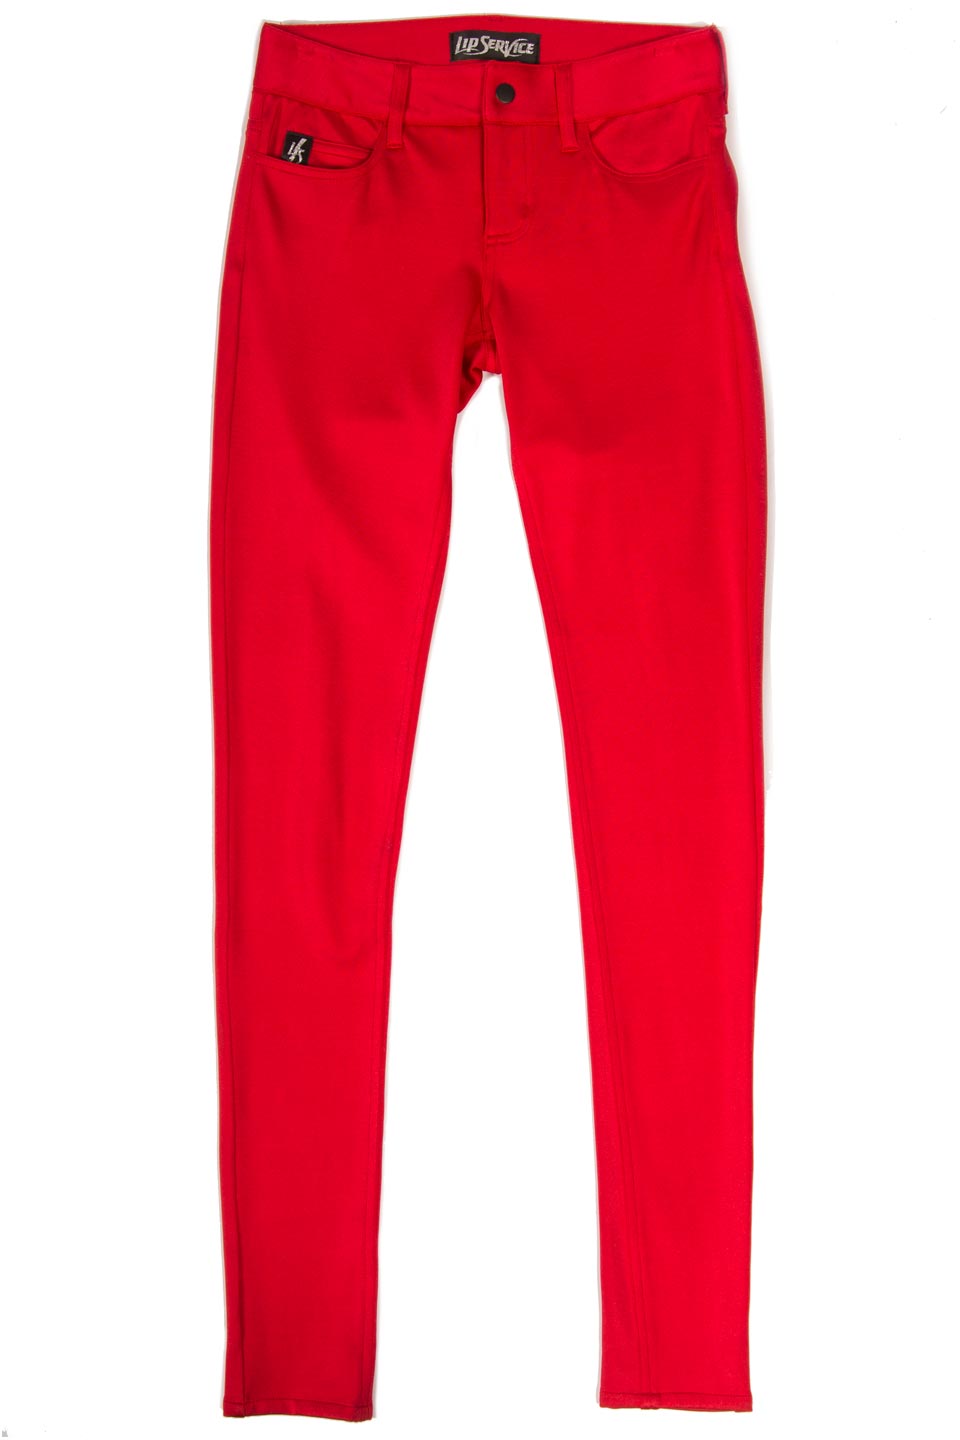 Straight From The Heart Red Glam Spandex Jean-Bottoms-Lip Service